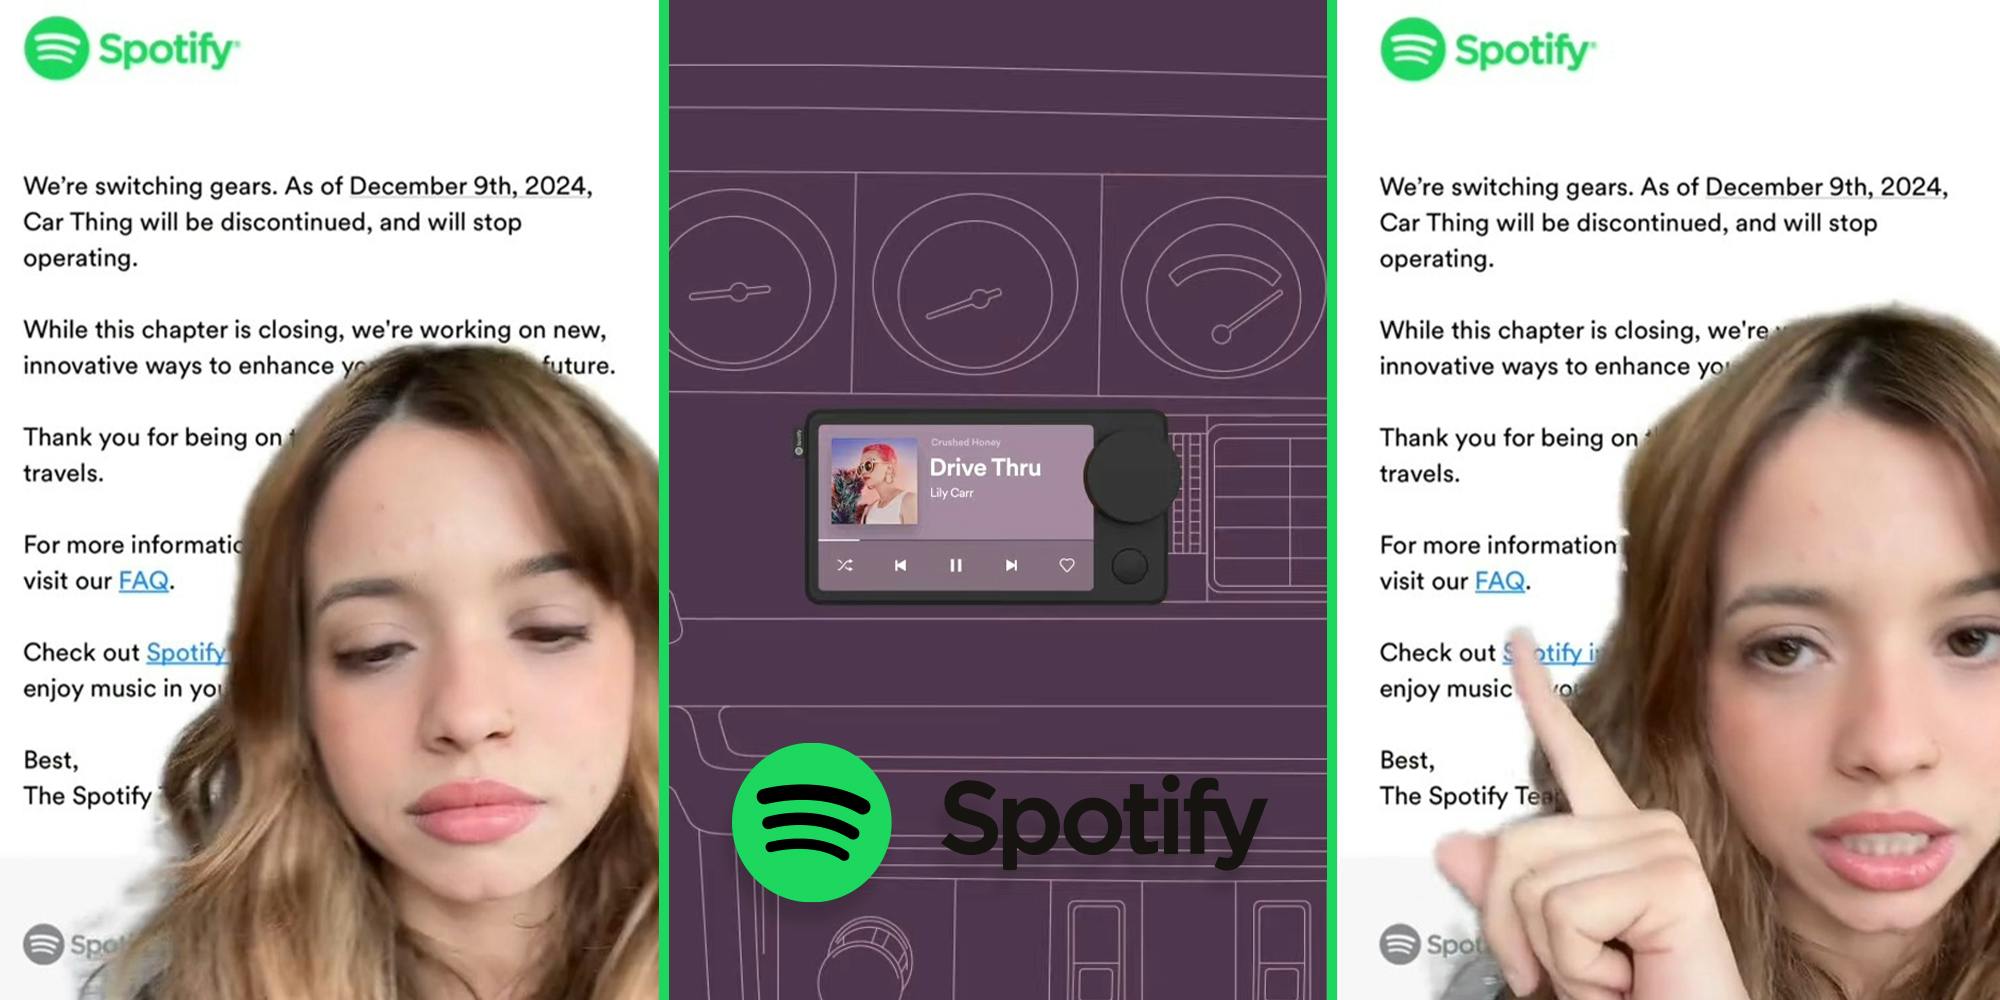 Driver says this popular Spotify product is being discontinued